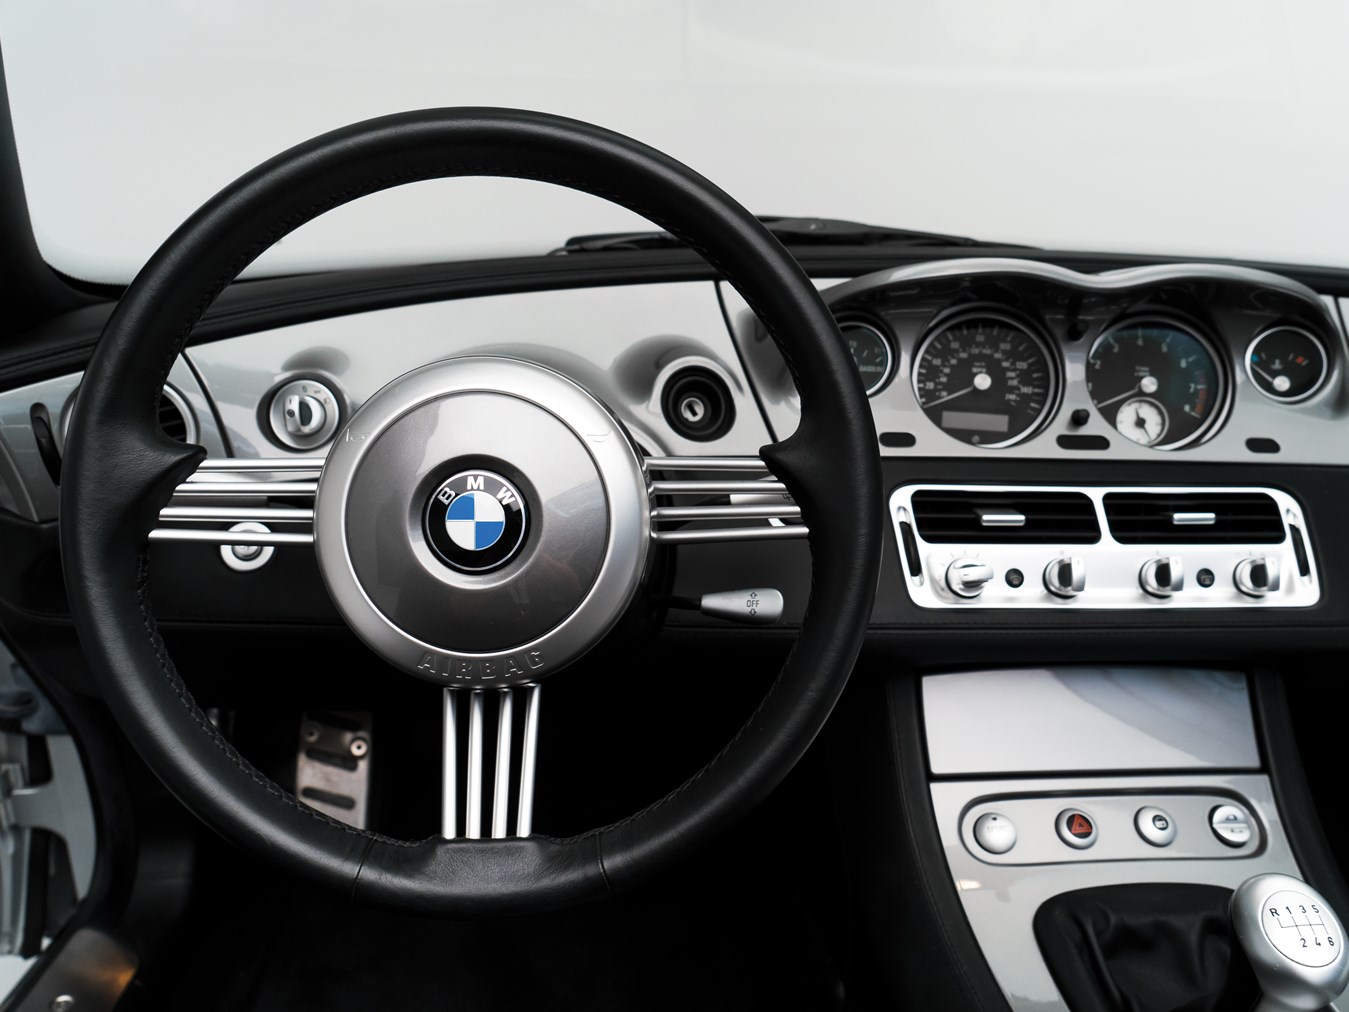 Now You Can Own Steve Jobs’ BMW Z8 And The Hated Motorola Flip Phone That Came With It